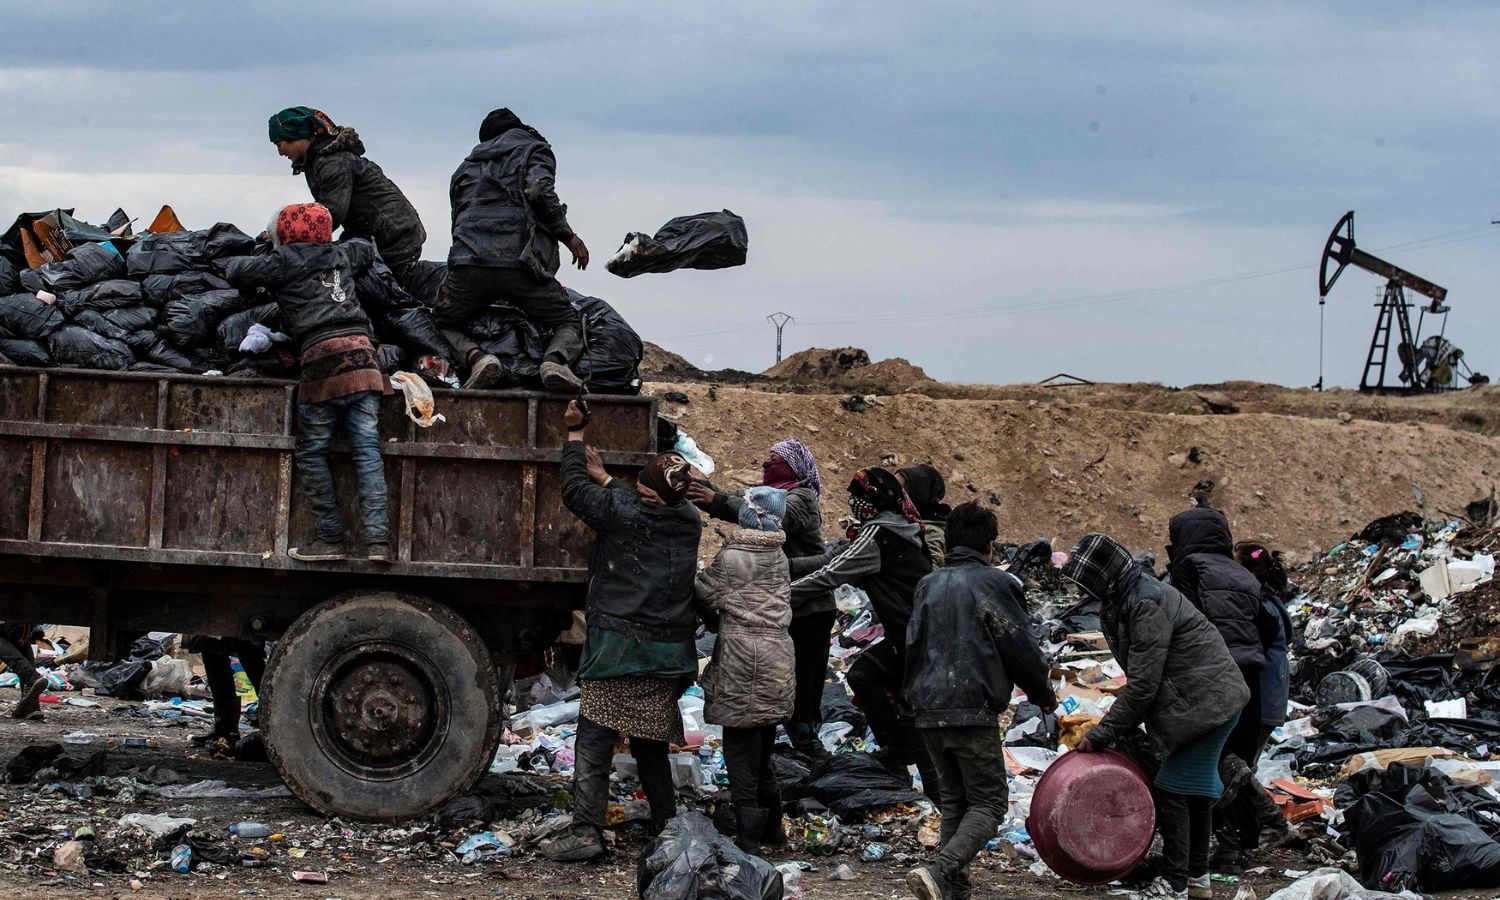 Syrians searching in a waste dump near an oil well near the town of al-Malikiyah, northeast Syria - January 20, 2021 (AFP)